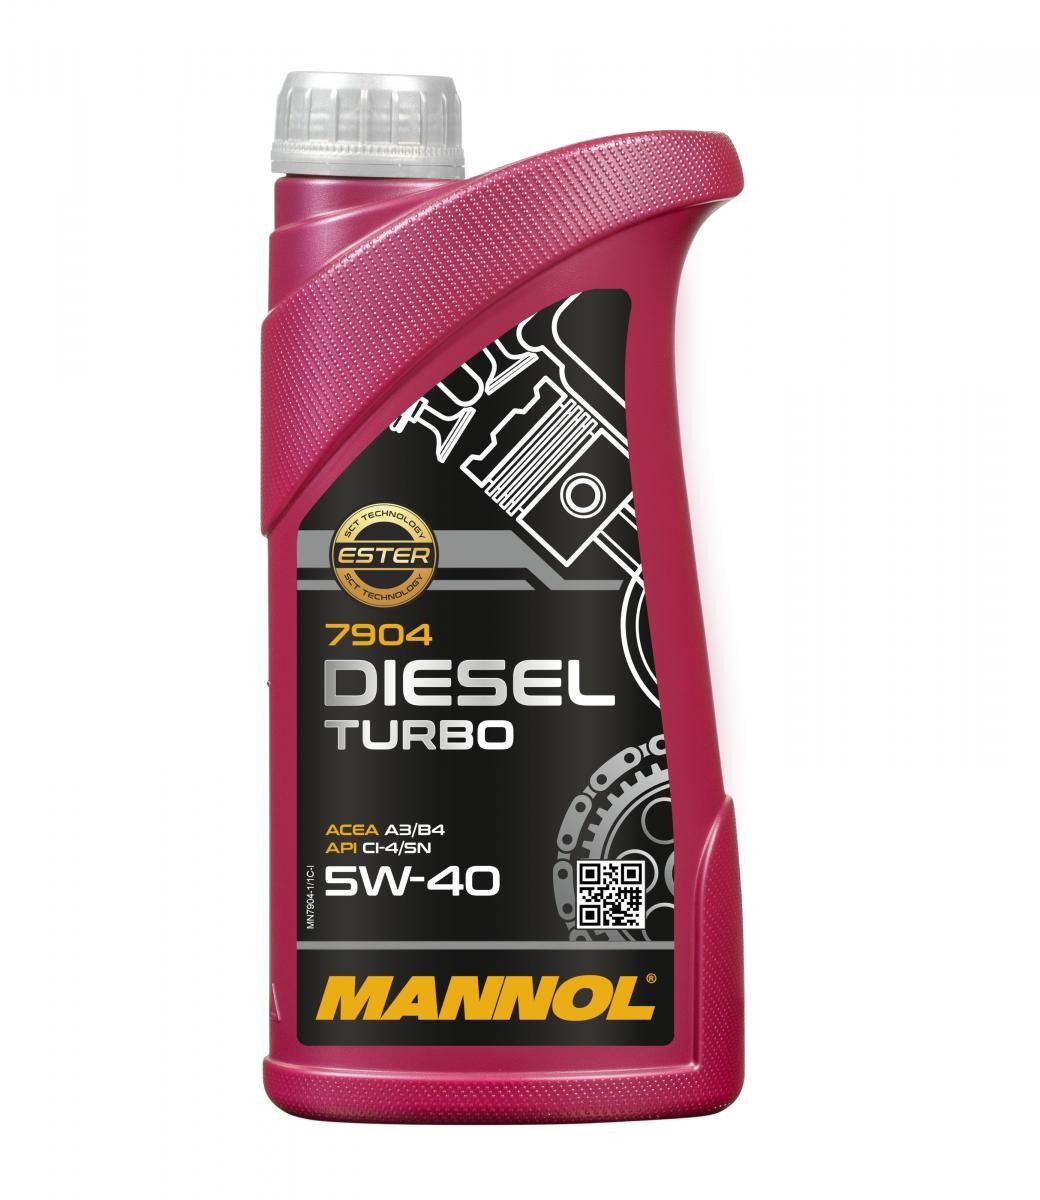 MANNOL DIESEL TURBO MN7904-1 Engine oil 5W-40, 1l, Synthetic Oil